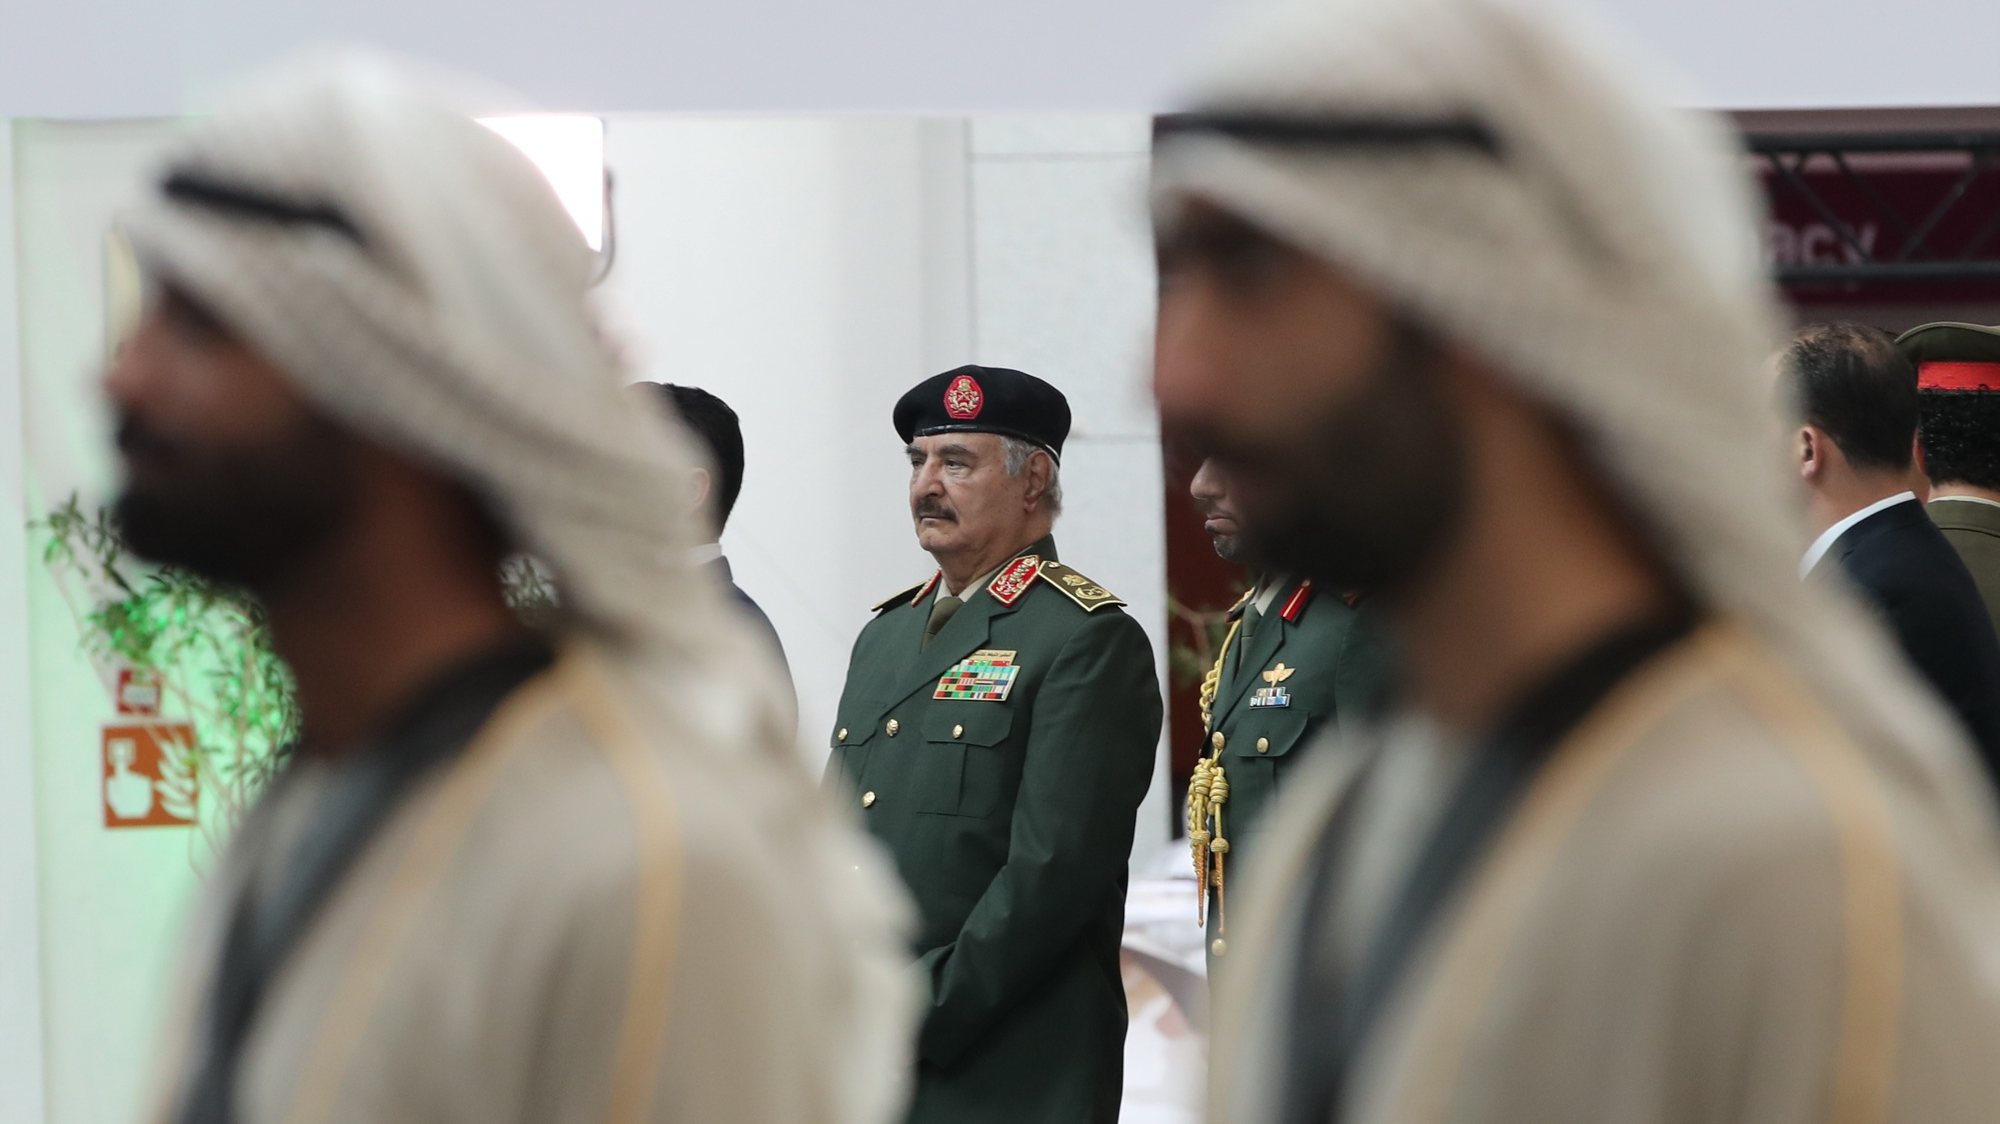 epa10479627 Commander of the Libyan National Army, Field Marshal Khalifa Belqasim Haftar (C), tours the 16th edition of International Defence Exhibition and Conference (IDEX) and the 7th edition of the Naval Defence and Maritime Security Exhibition (Navdex) in Abu Dhabi, United Arab Emirates, 20 February 2023. IDEX is the largest joint defence exhibition in the Middle East and North Africa (MENA) region, it is running from 20 untill 24 February 2023.  EPA/ALI HAIDER